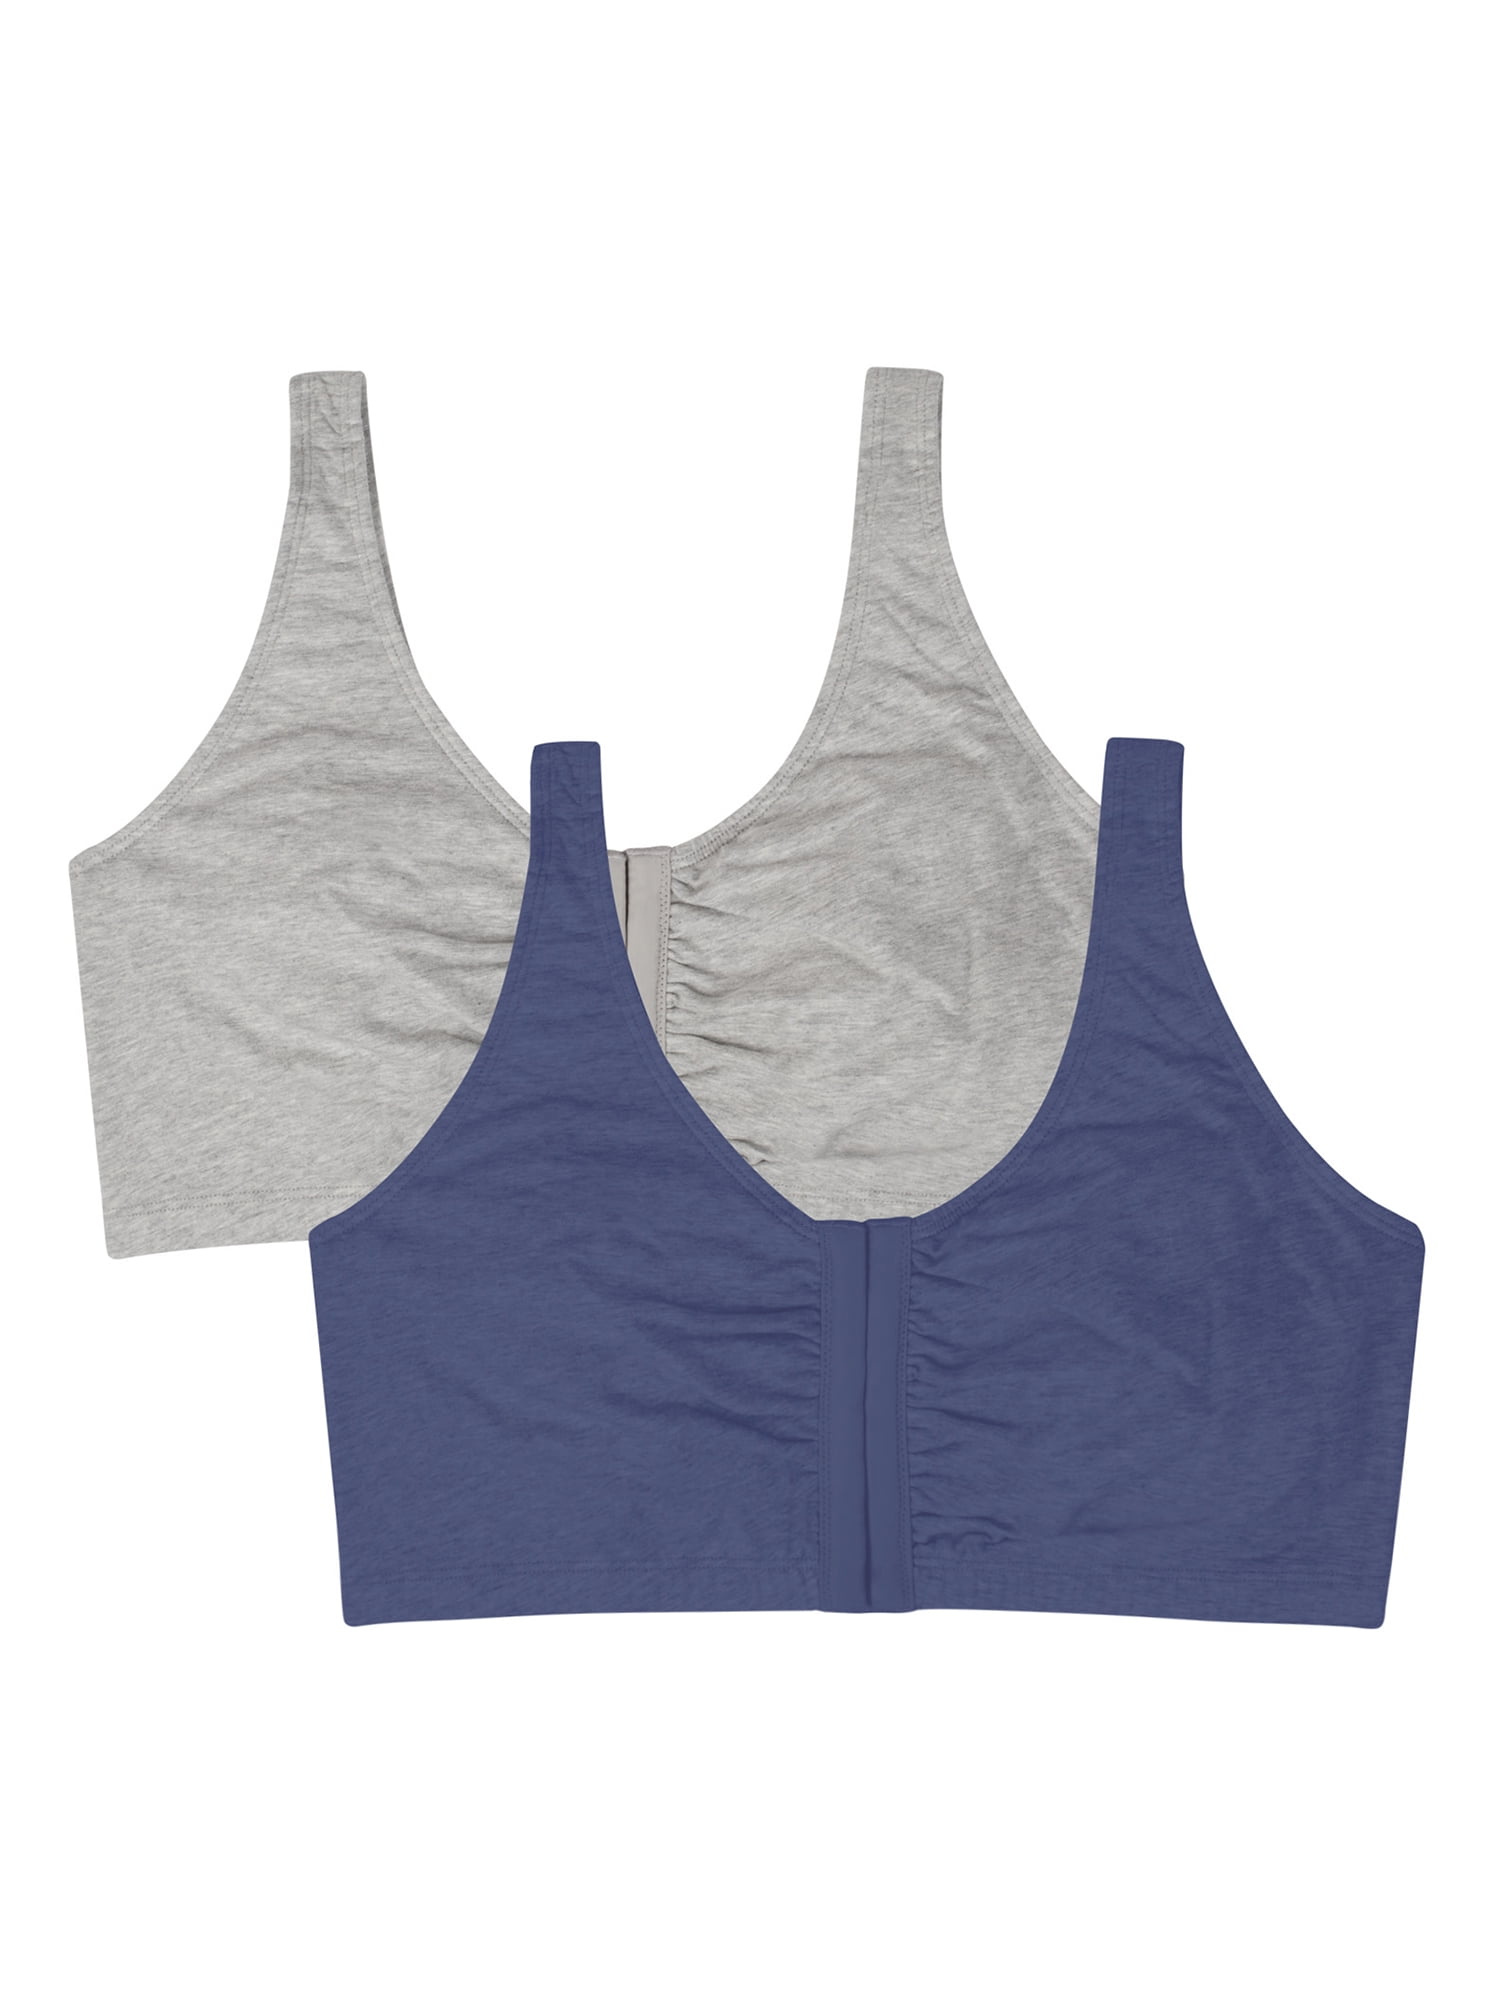 Fruit of the Loom GRAY COTTON SPORTS BRA SIZE 34 - $15